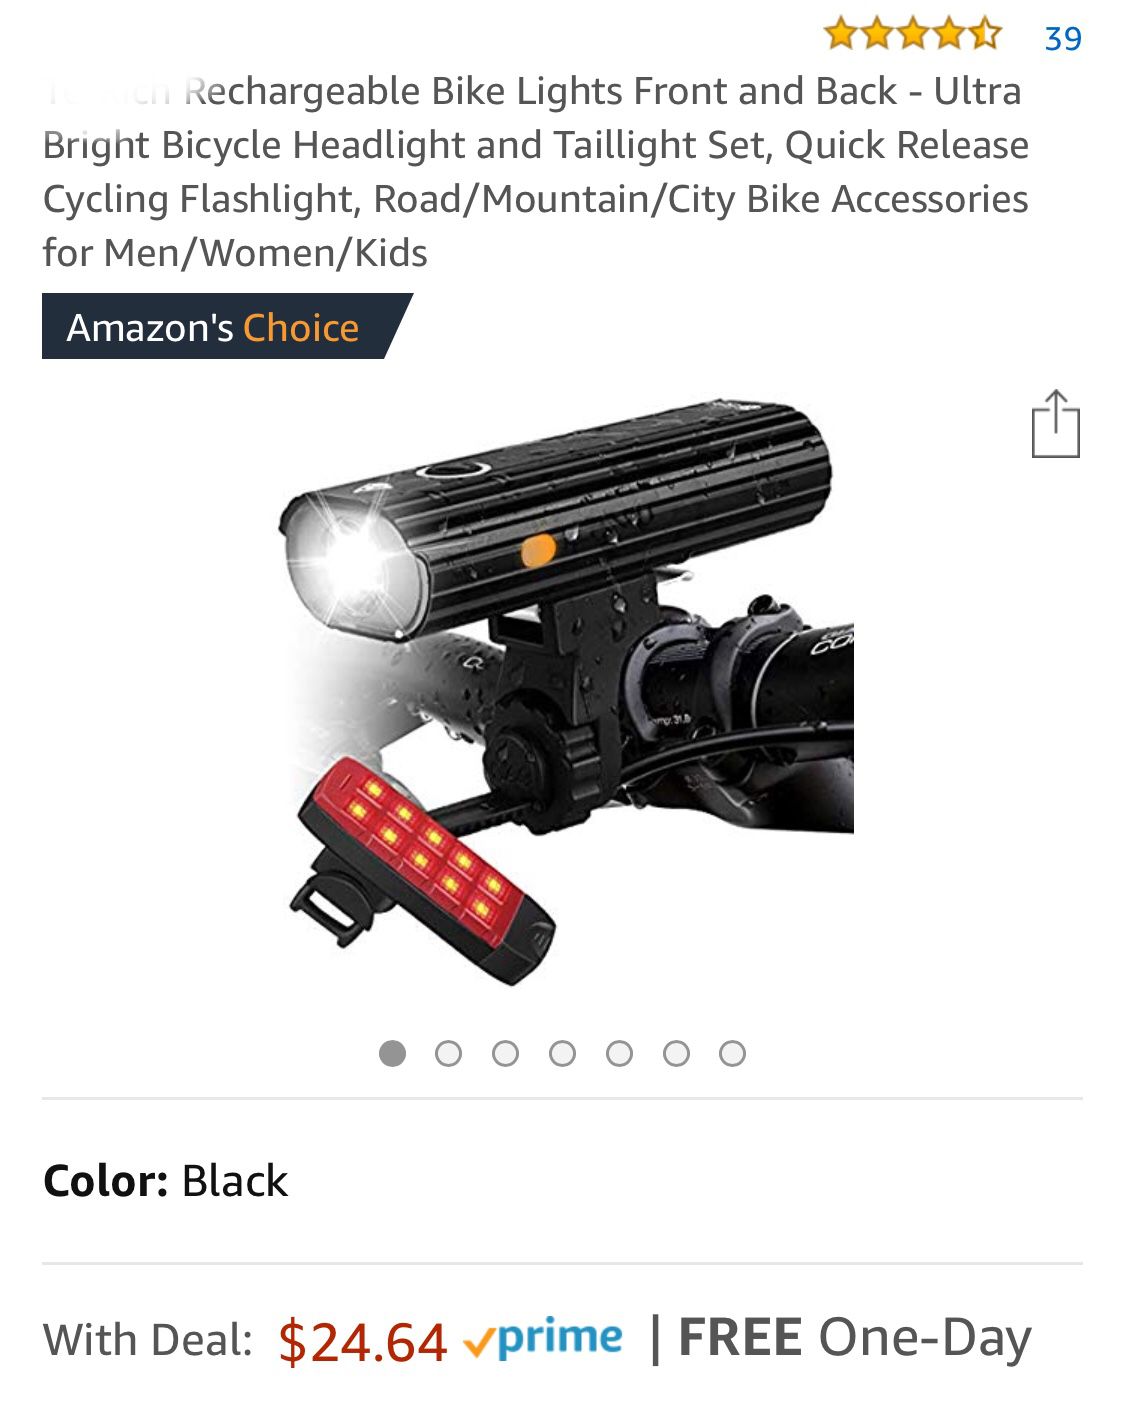 Rechargeable Bike Lights Front and Back - Ultra Bright Bicycle Headlight and Taillight Set